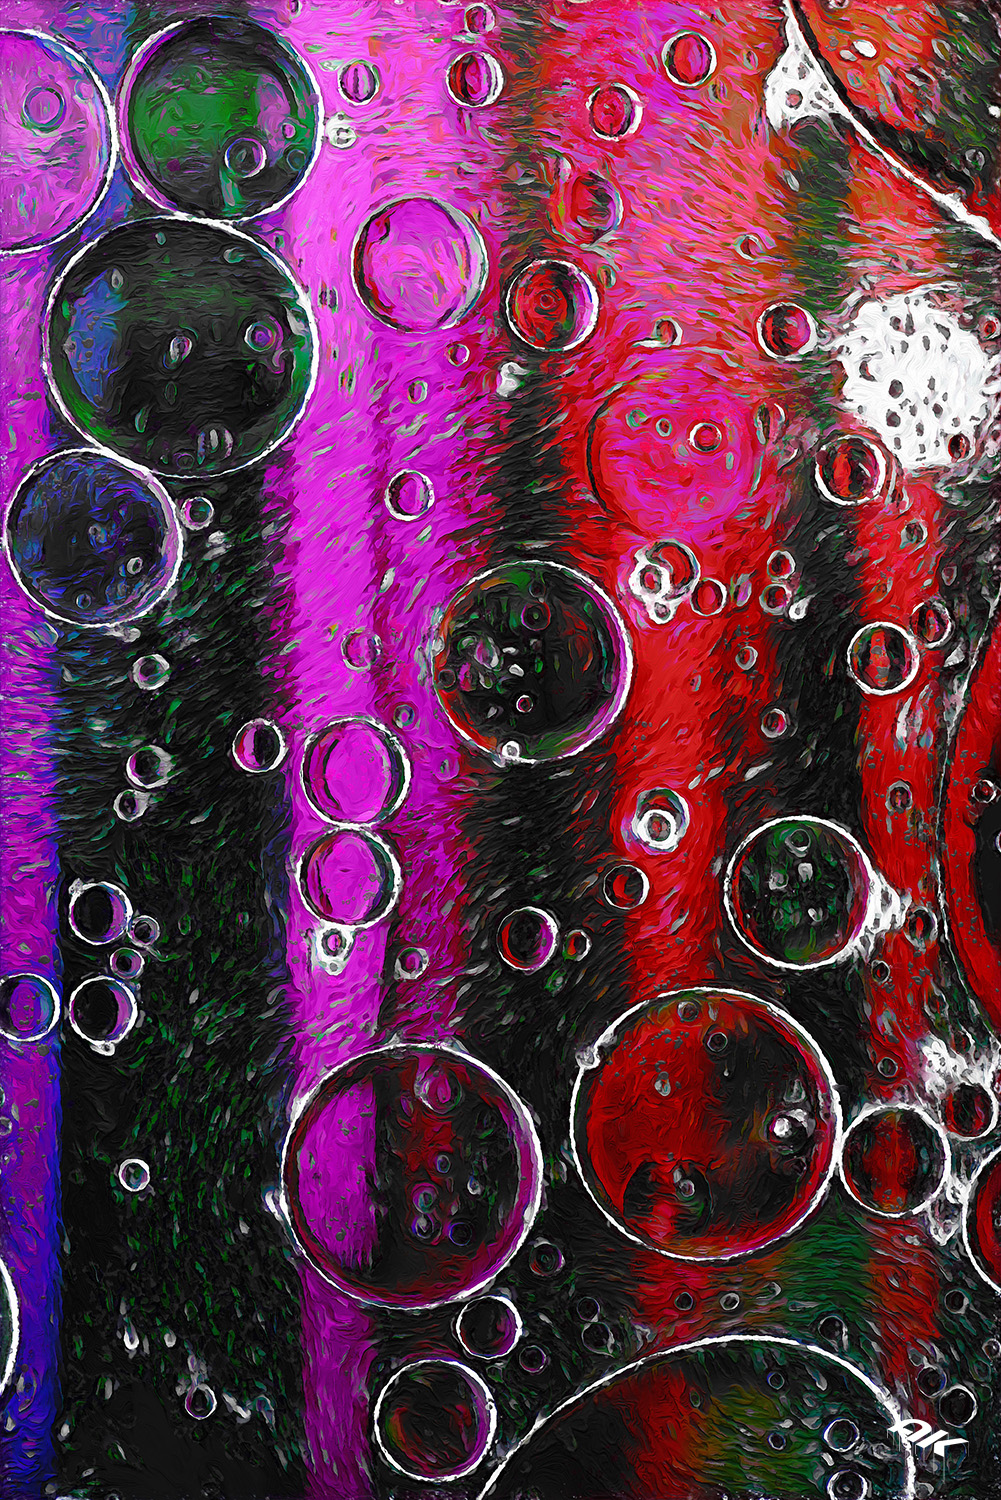 Pink and purple abstract pattern made with oil bubbles on water coming up in motion